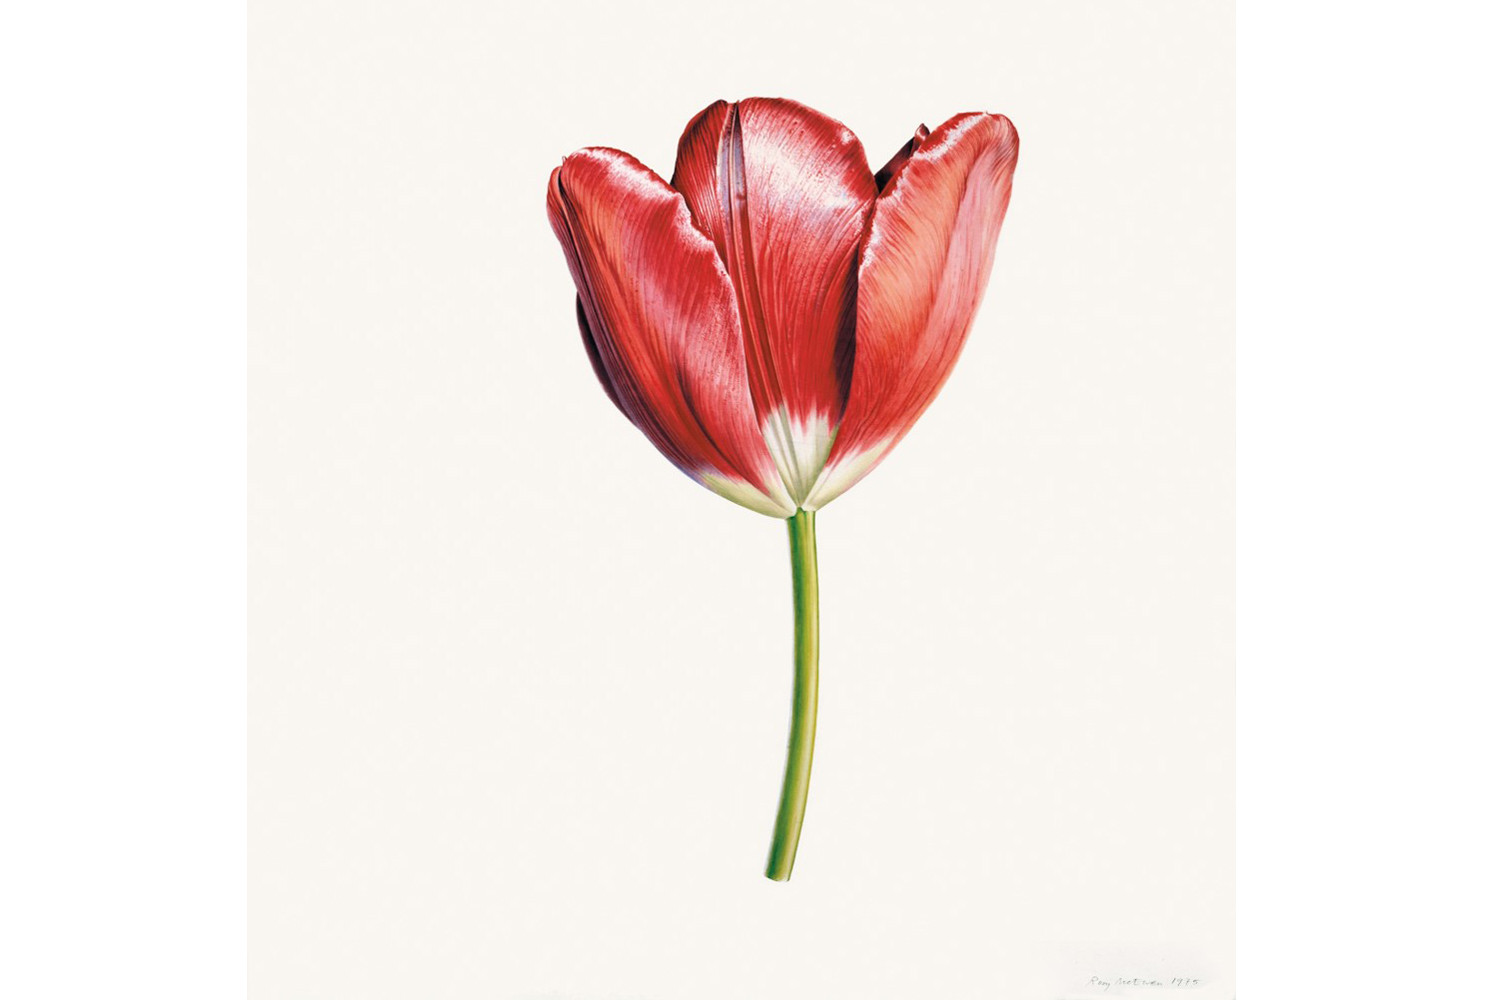 Tulip ‘Helen Josephine’, 1975, by Rory McEwen (Scottish, 1932 – 1982). Watercolor on vellum, 29.75 x 26.25 inches. Loan courtesy of Rory McEwen Ltd. ©Estate of Rory McEwen.